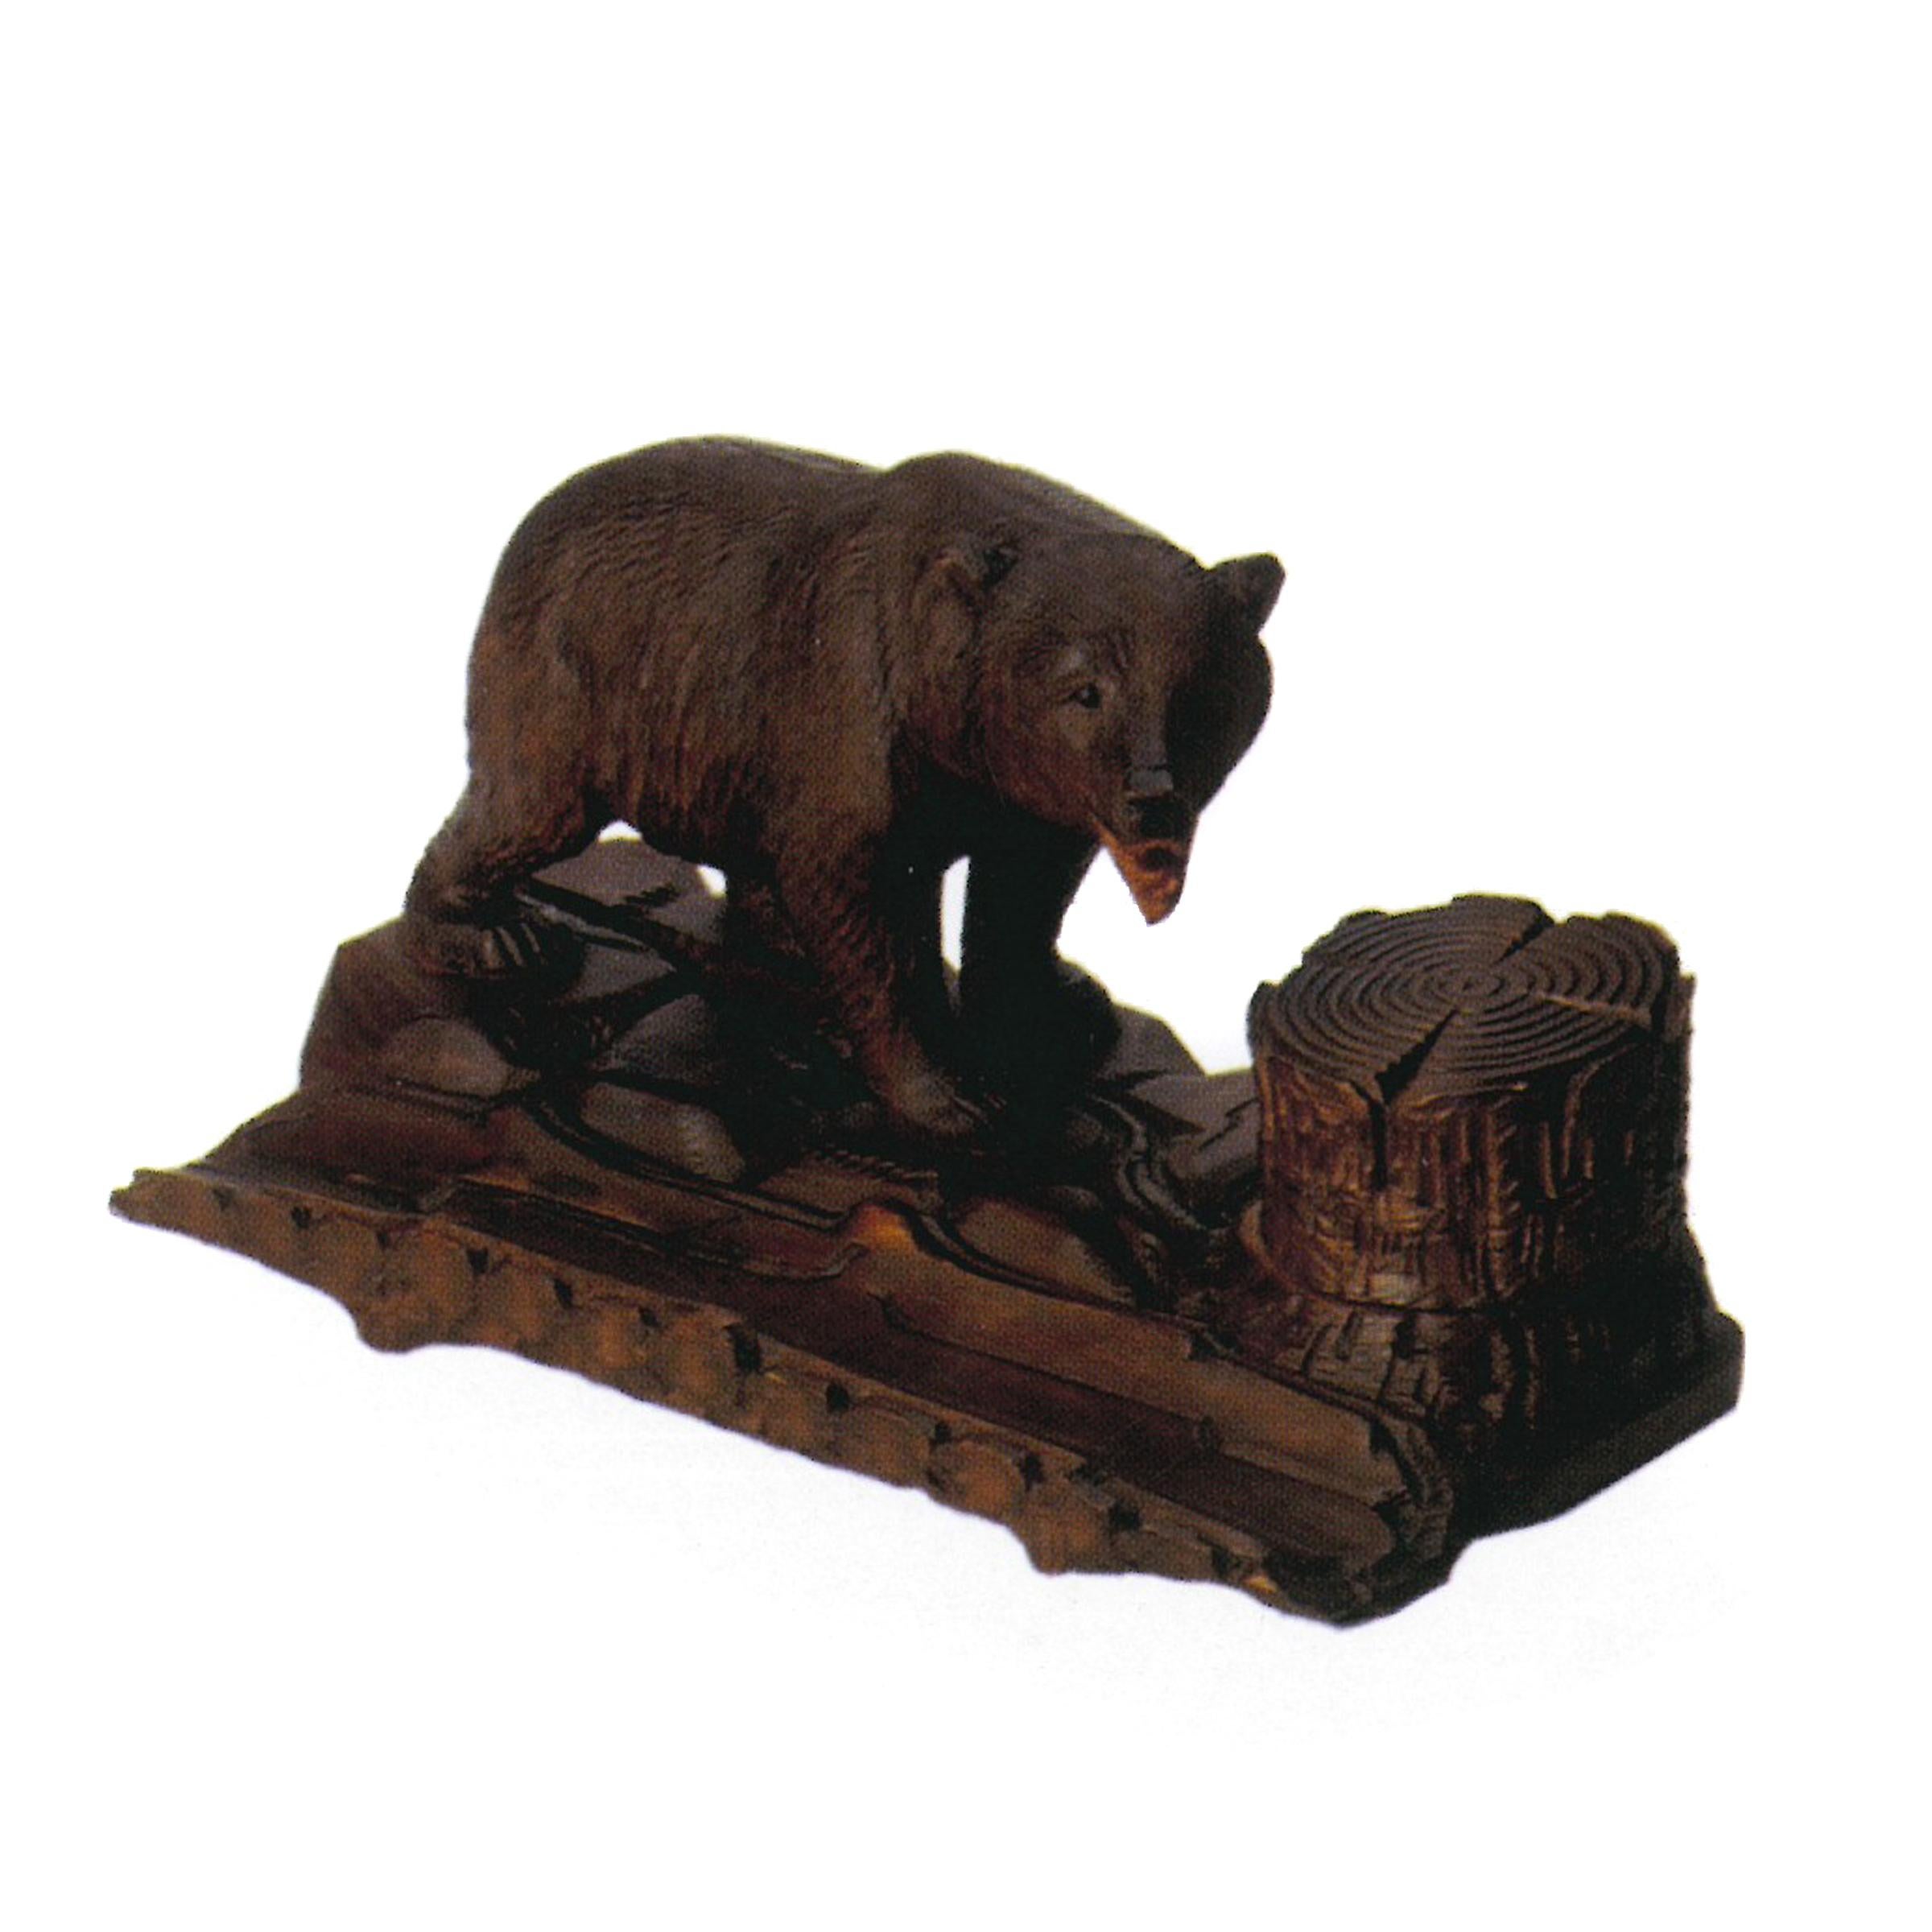 Walking bear pen holder and inkwell. Published in 